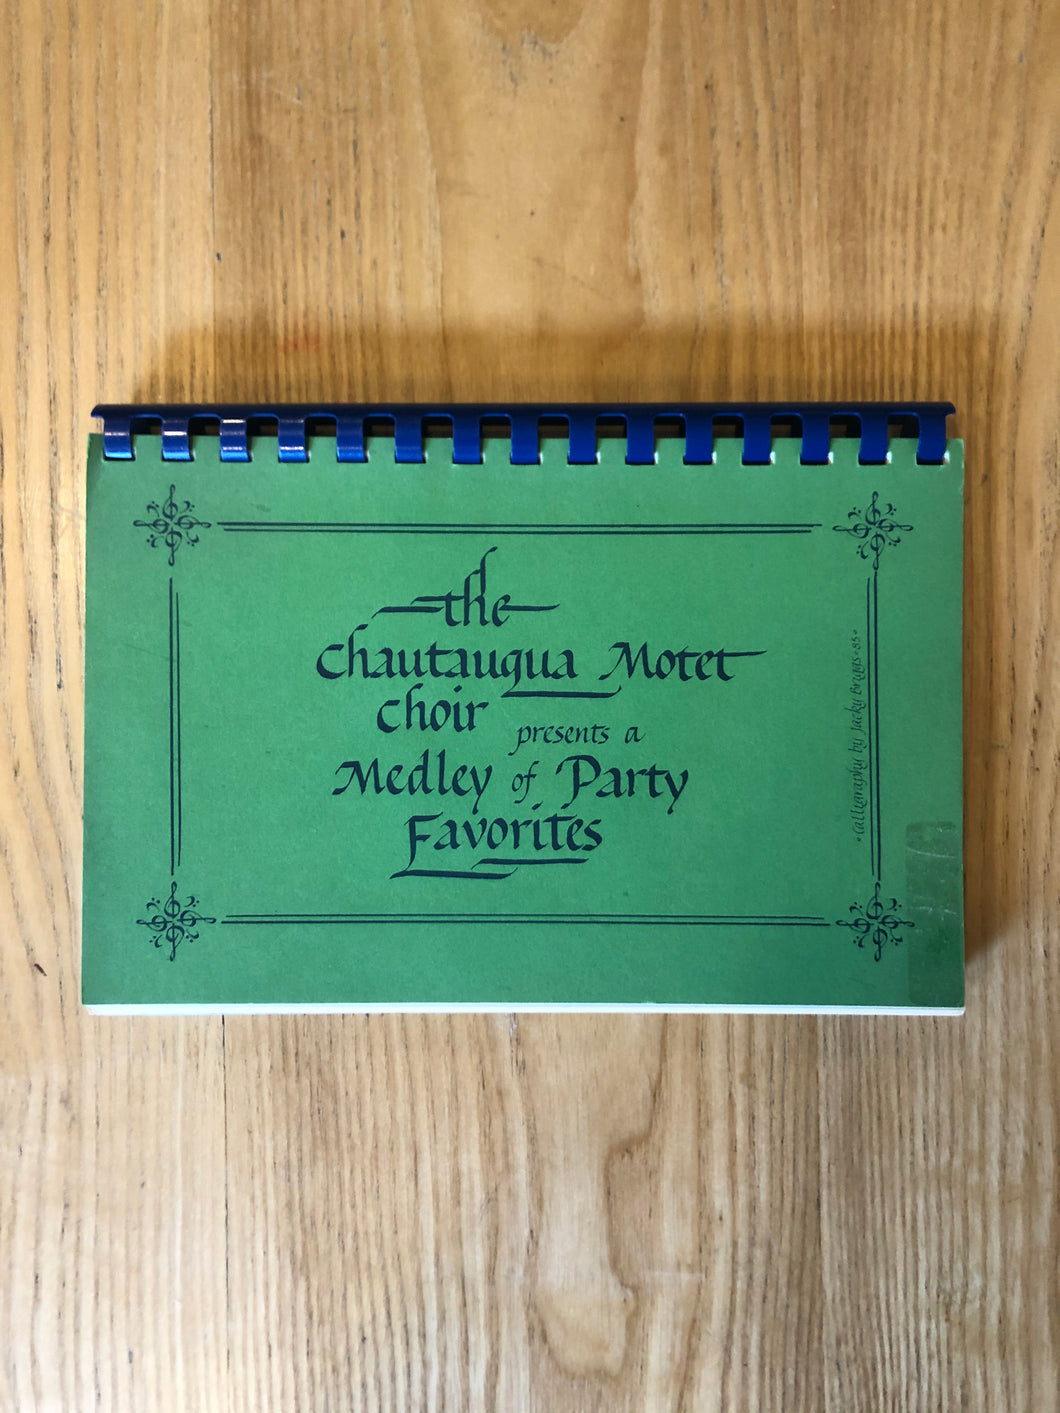 The Chautaugua Motet Medley of Party Favorites